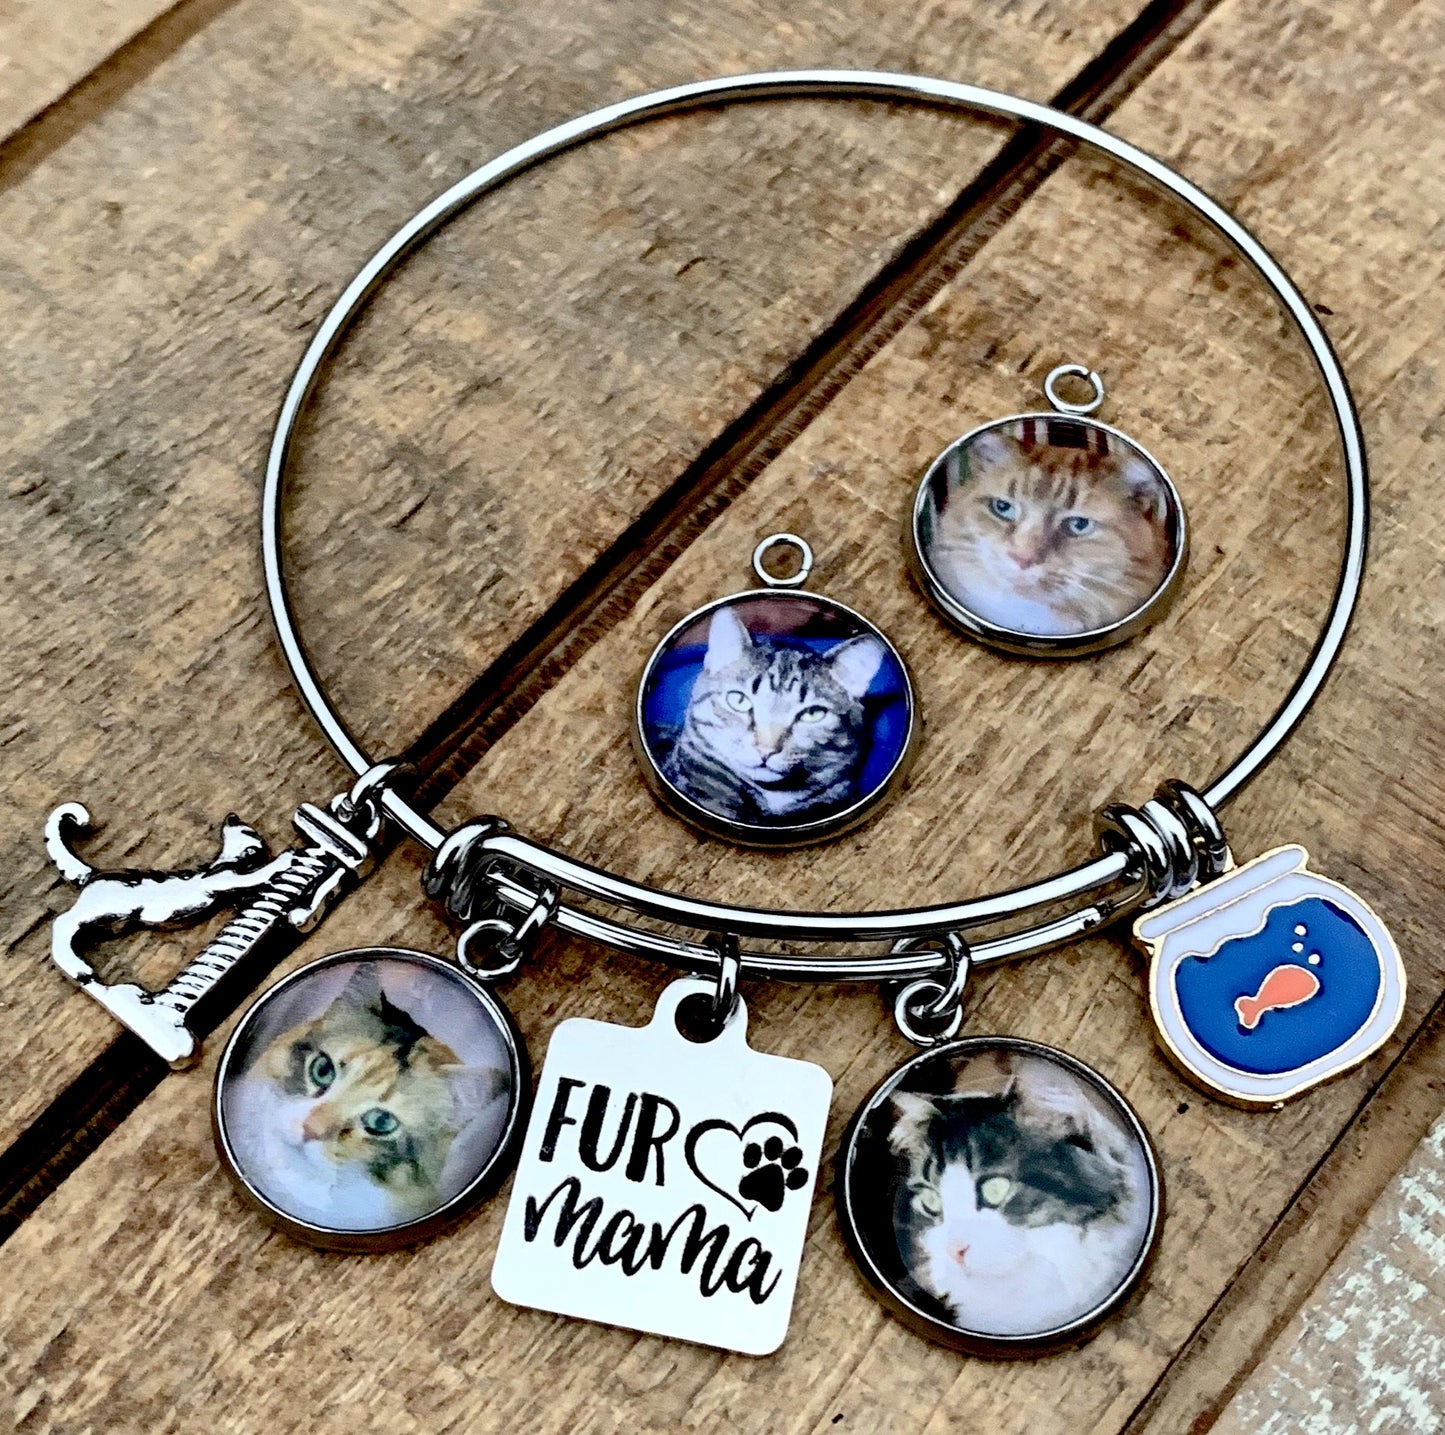 Fur Mama Bracelet- Dog or Cat Theme with two photos (or photo and pet name)